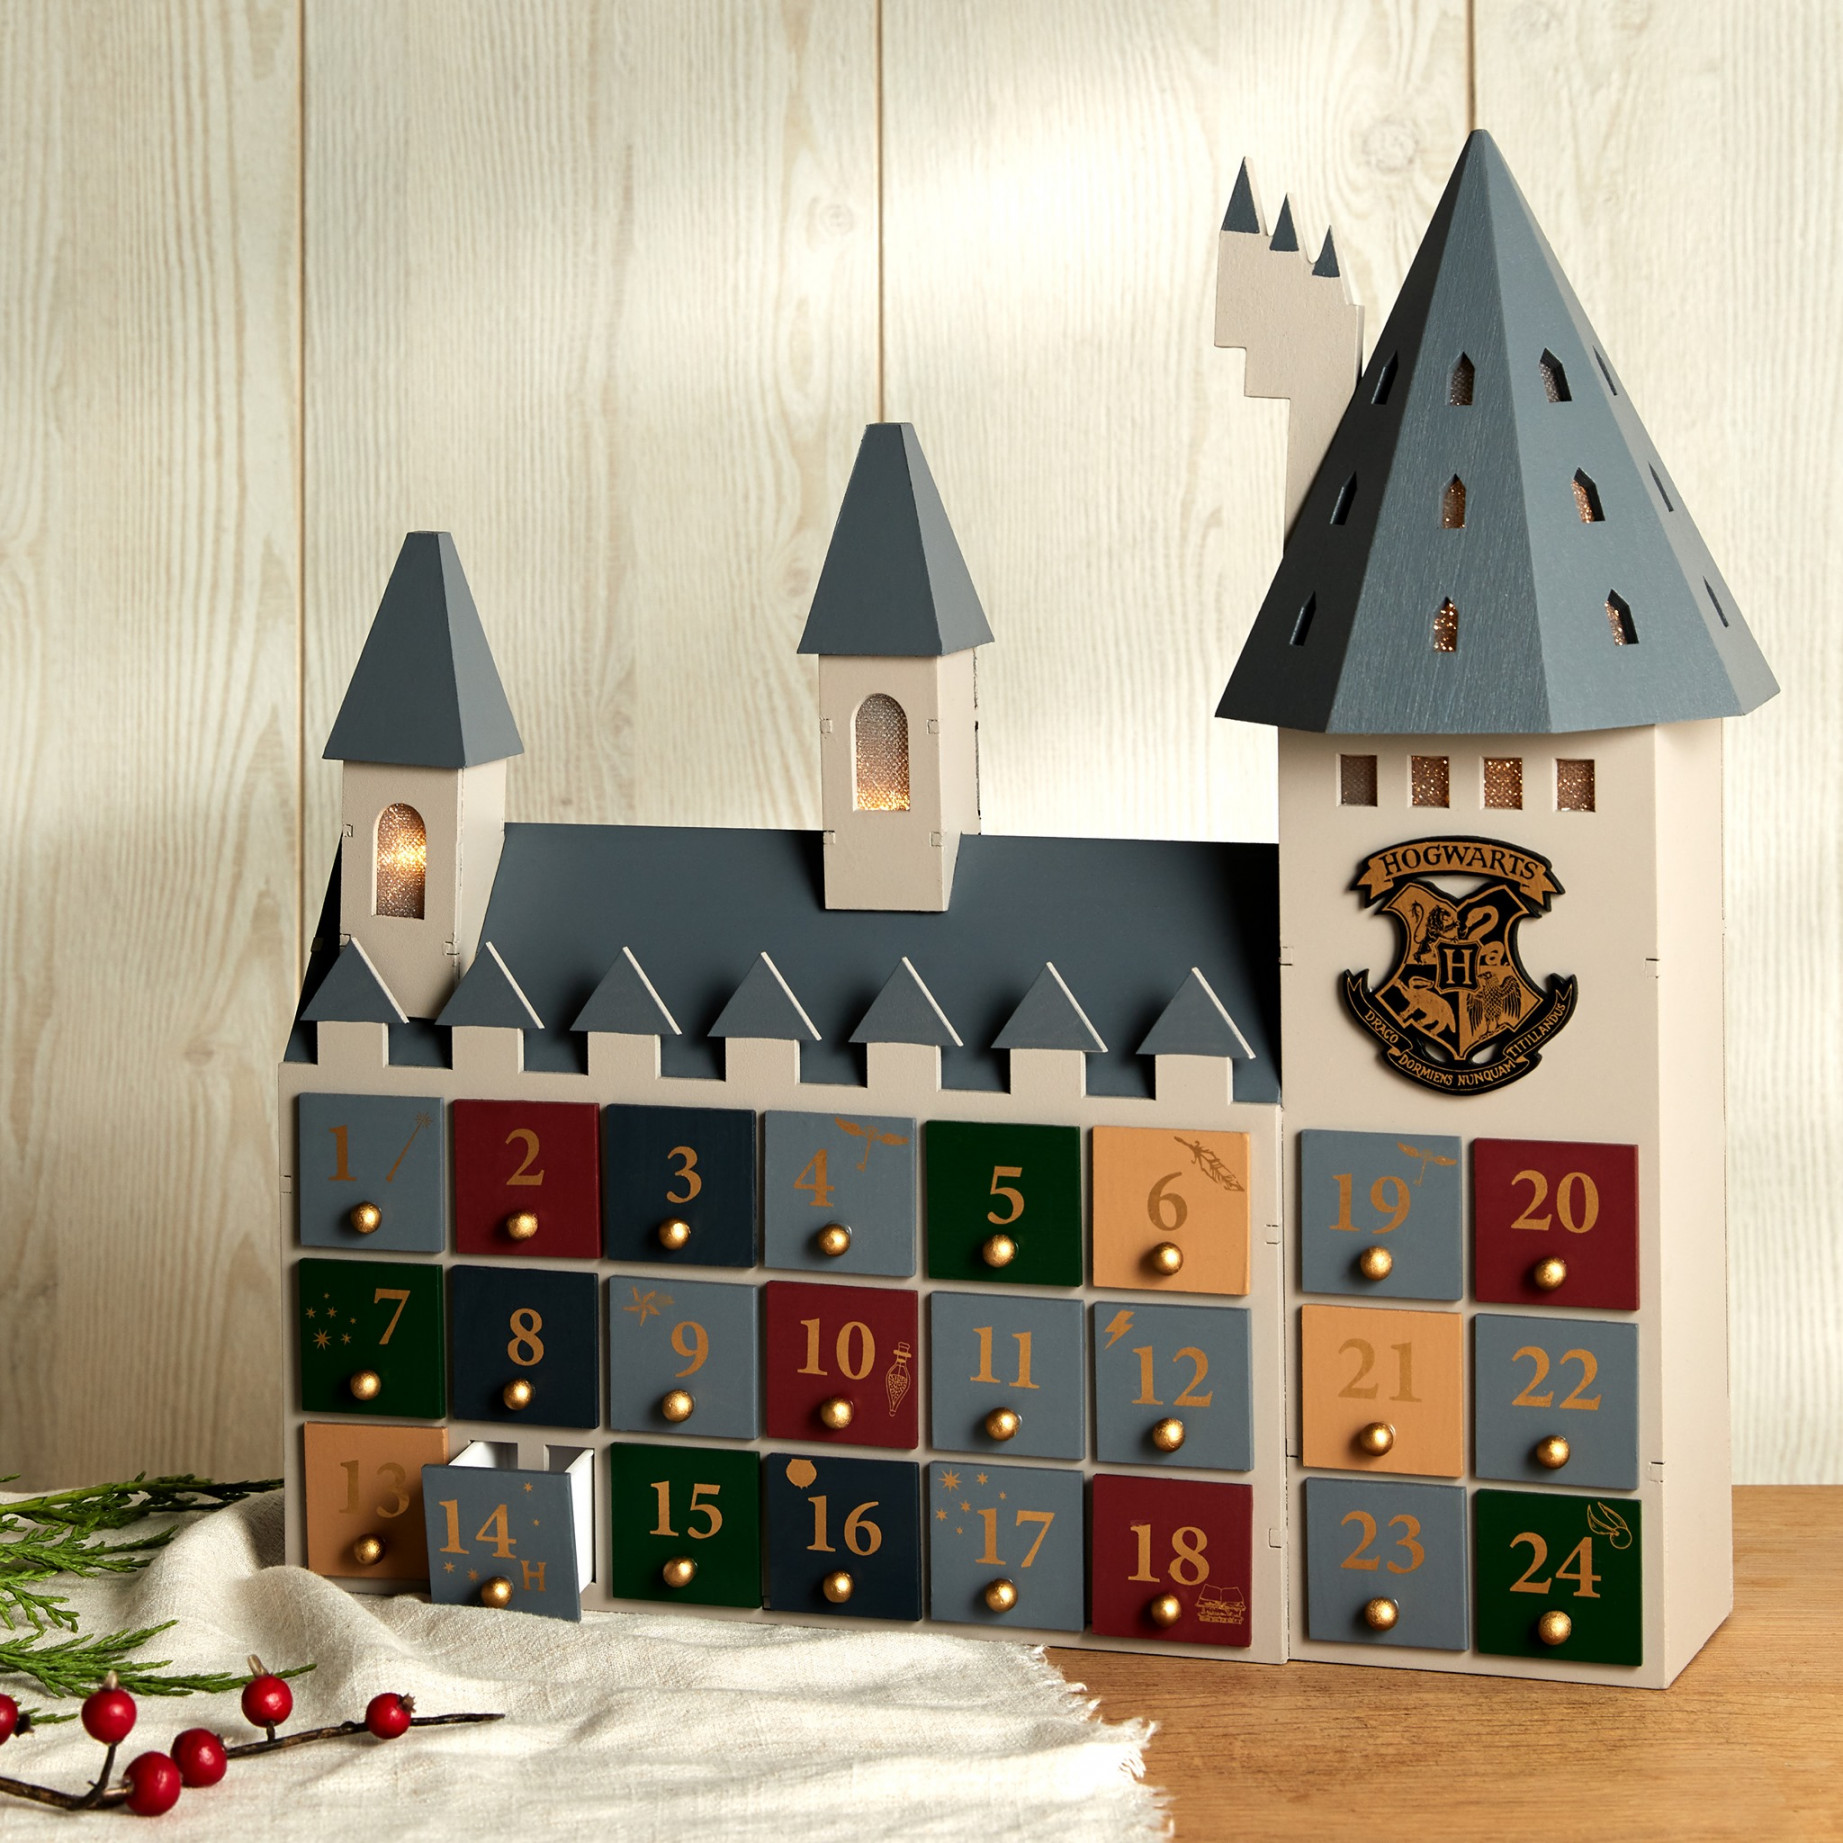 Primark is selling a magical Harry Potter advent calendar for